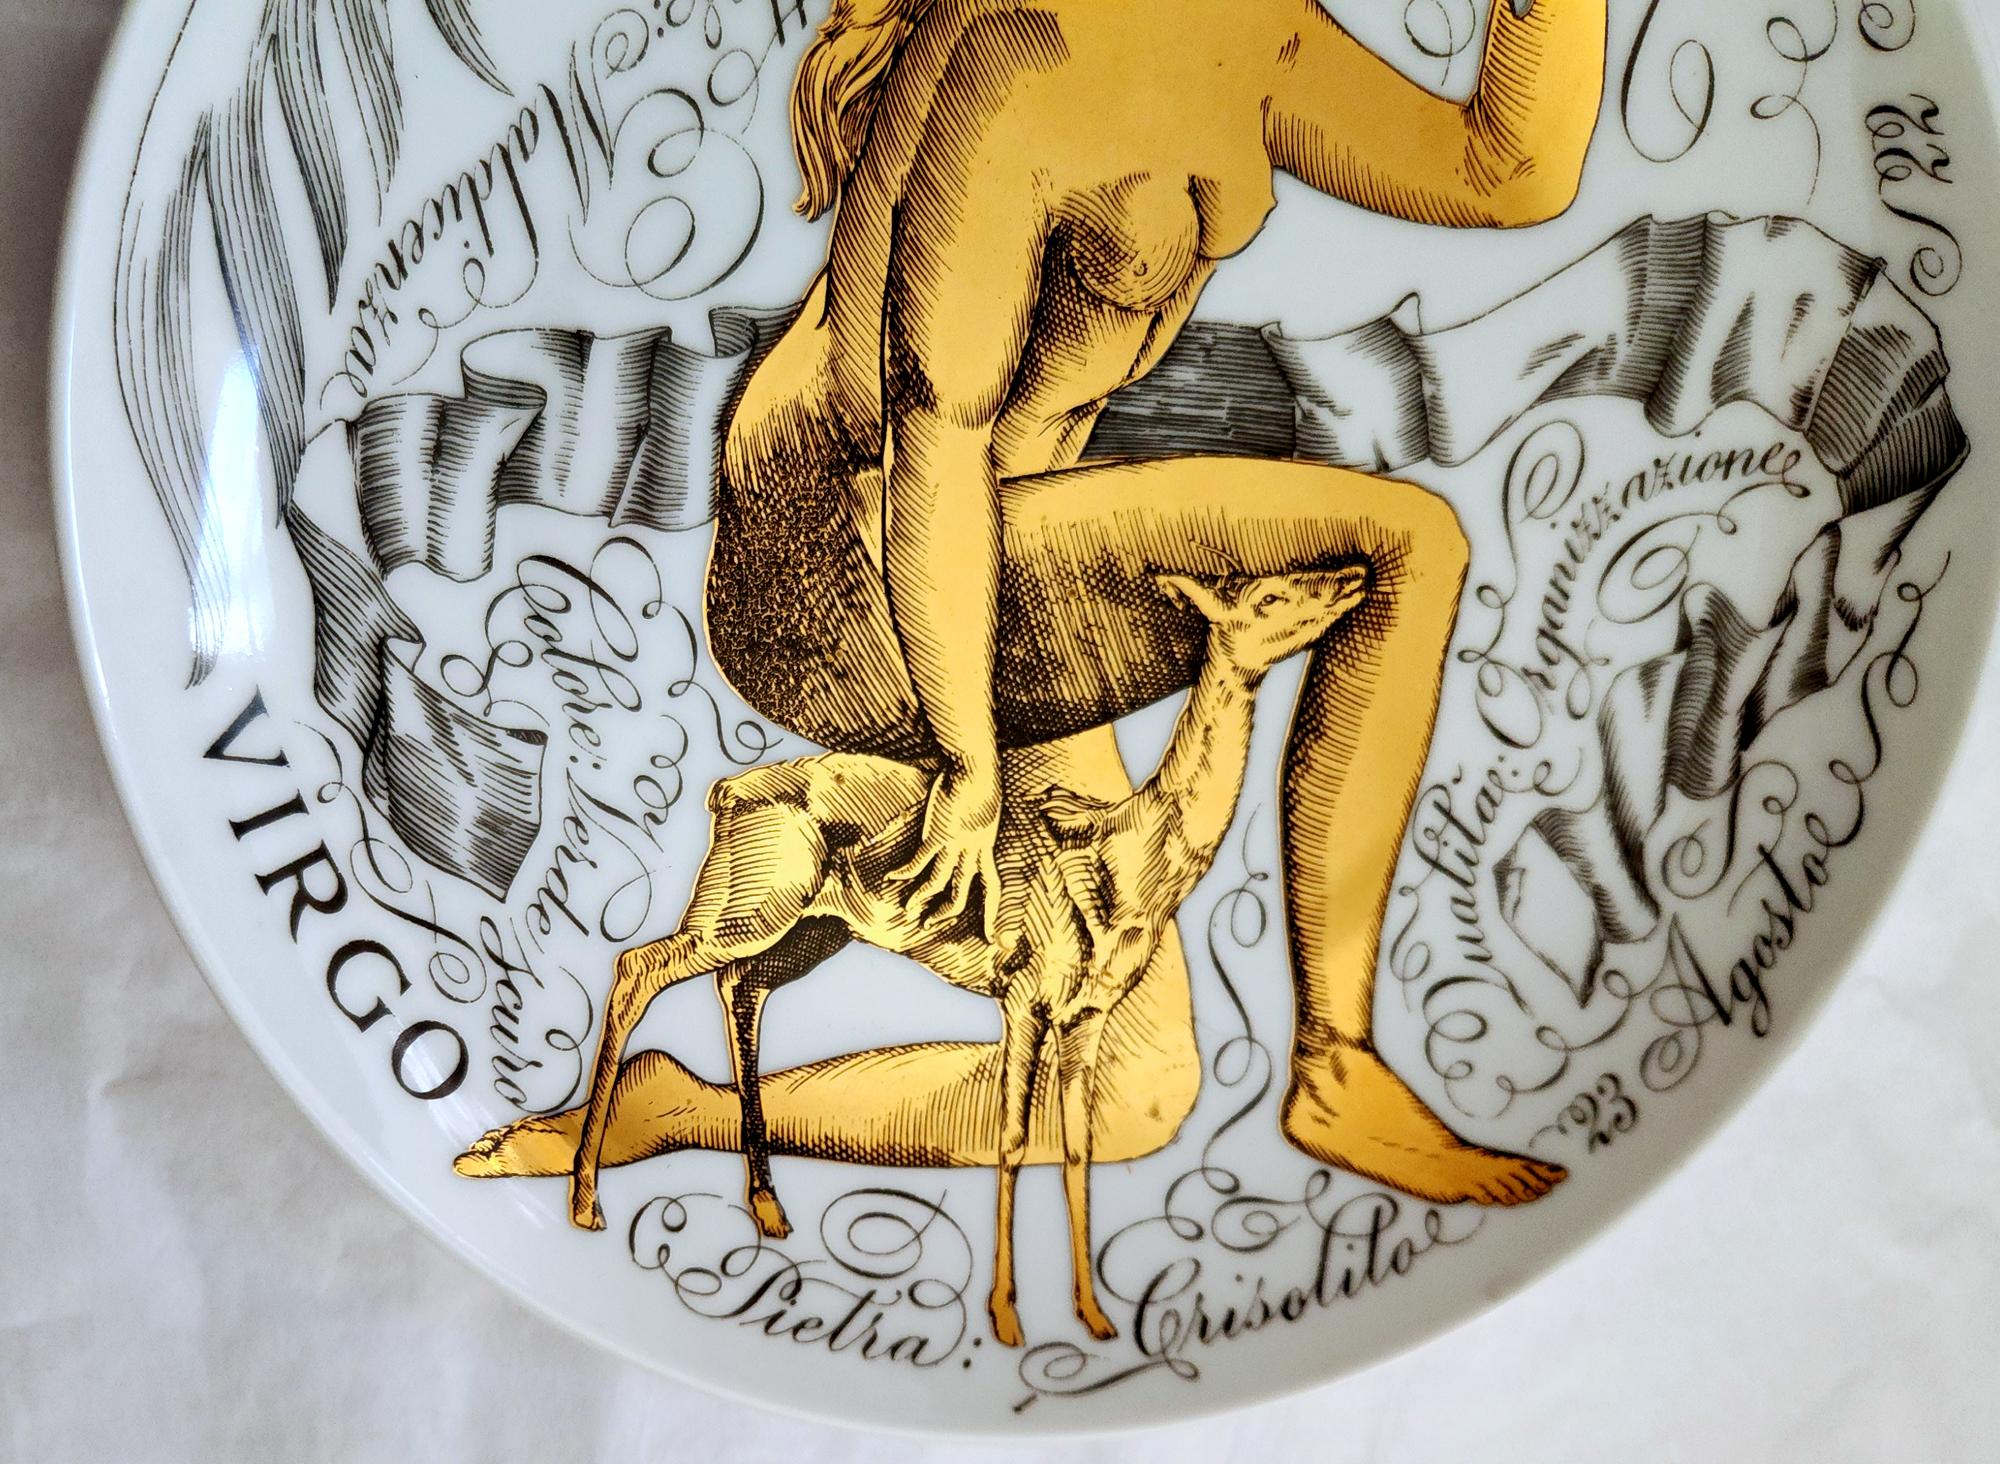 Piero Fornasetti Zodiac Porcelain Plate,
Virgo,
Made for Corisia in 1969 #6 in series.

The plate in black and gold depicts the astrological sign Virgo with words, intertwined around the form of a young naked woman kneeling by a fawn, with